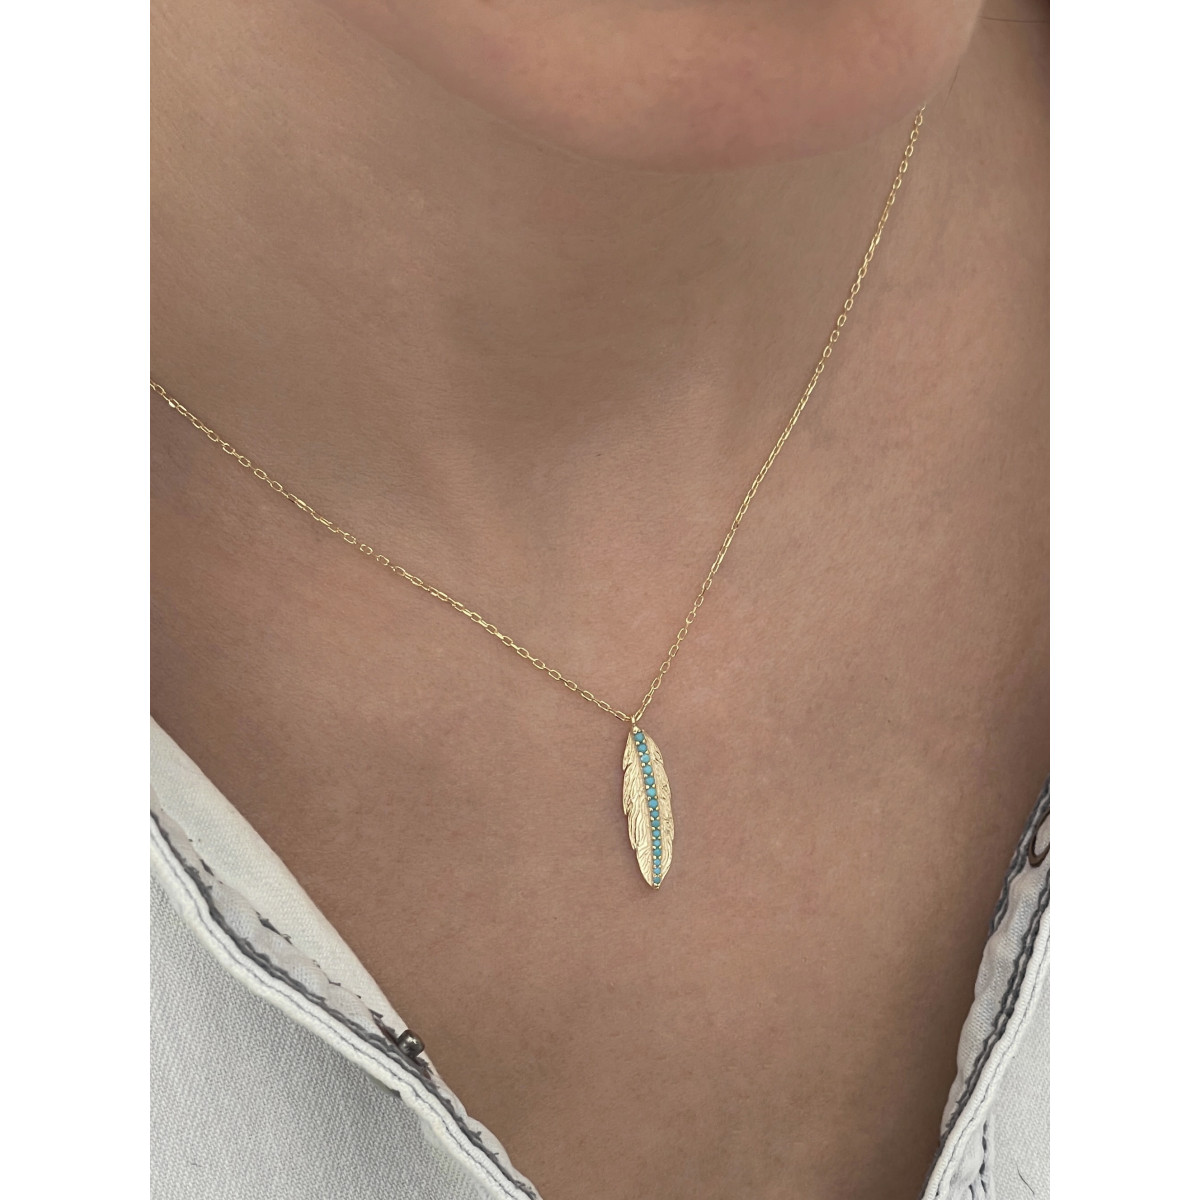 TURQUOISE LINE FEATHER PENDANT NECKLACE